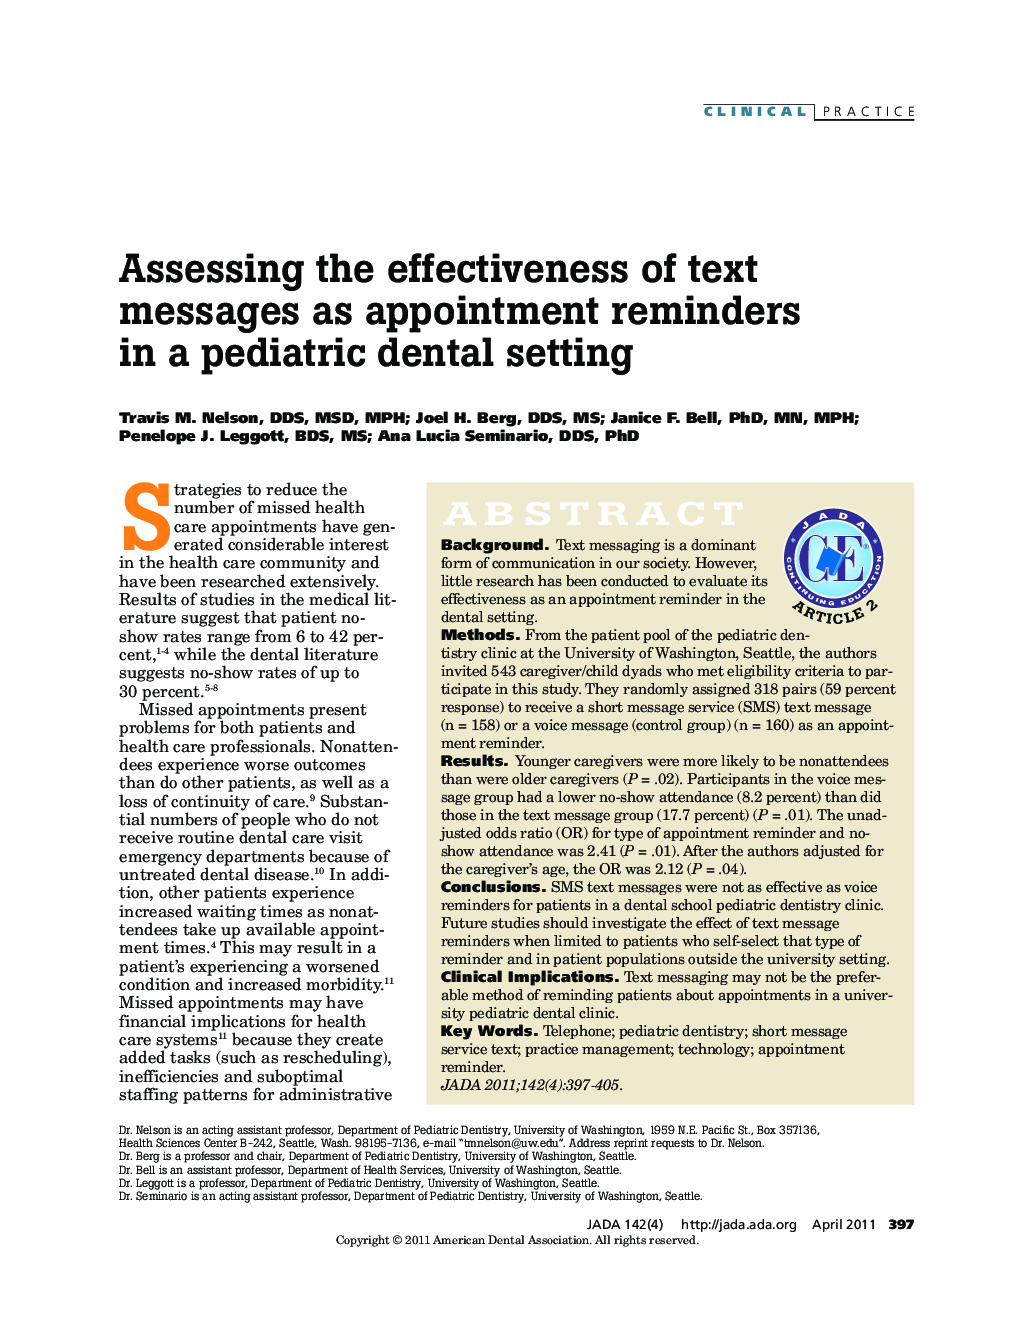 Assessing the effectiveness of text messages as appointment reminders in a pediatric dental setting 